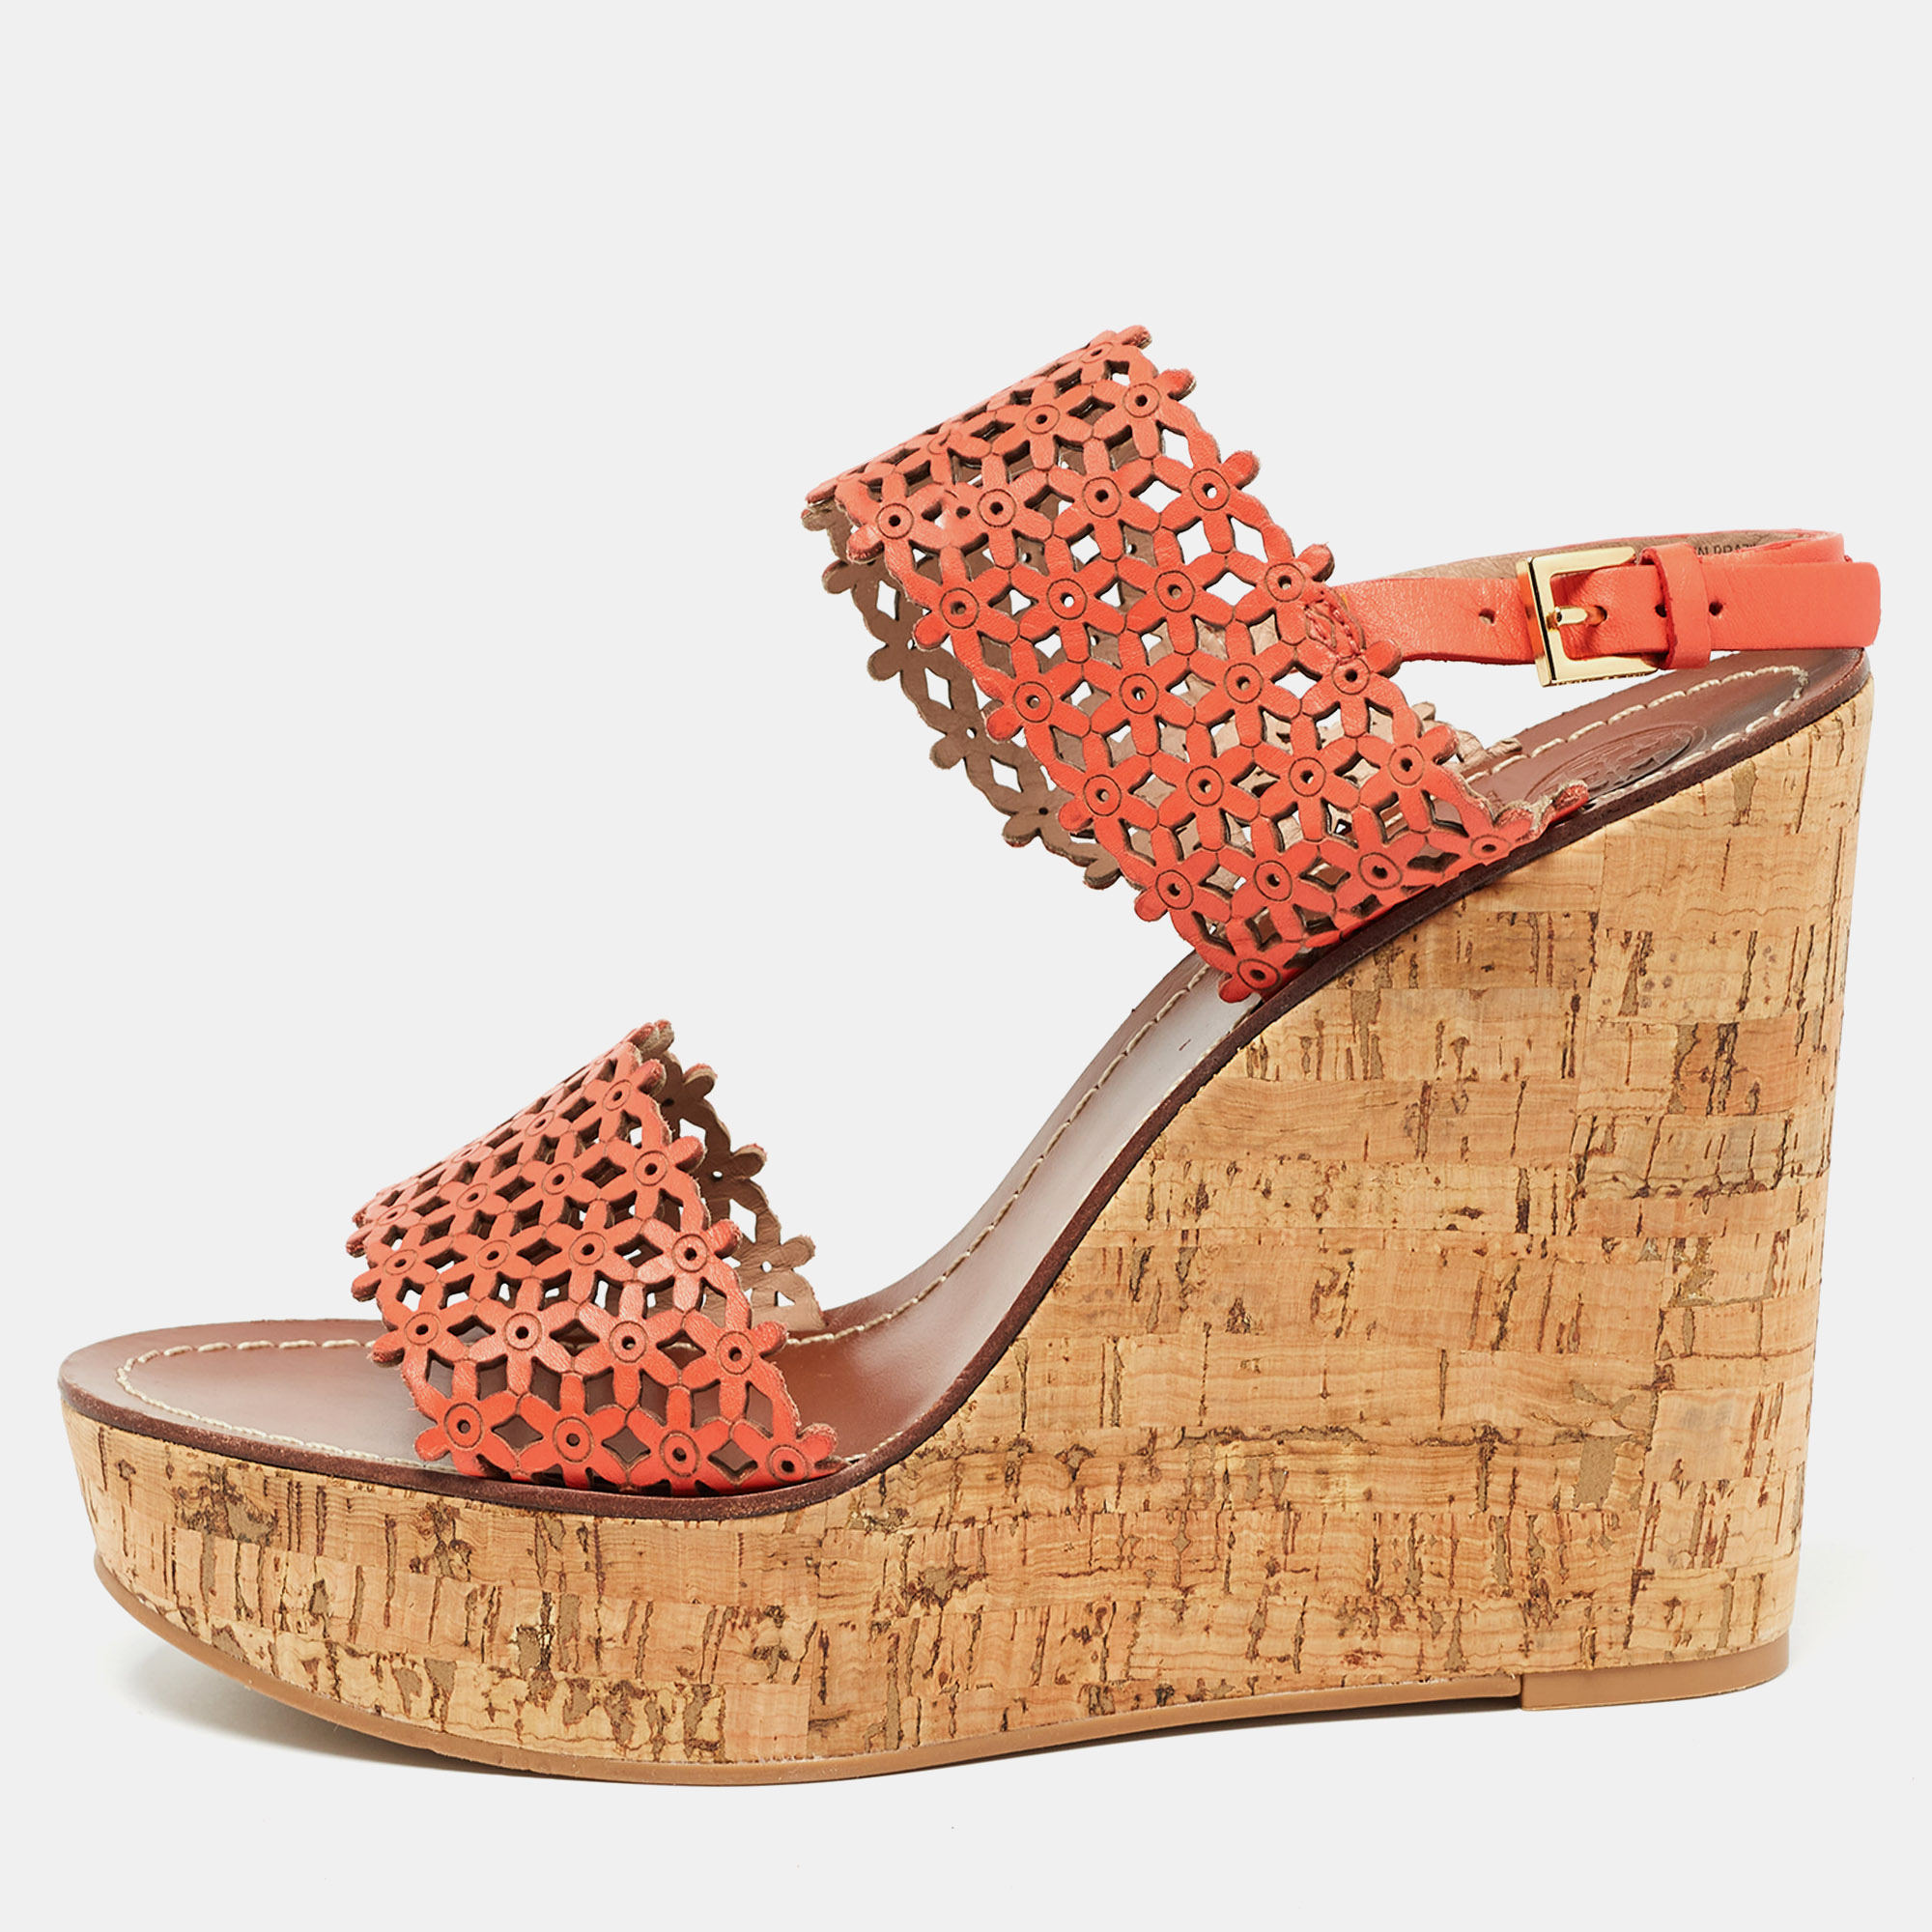 Tory burch orange perforated leather daisy cork wedge sandals size 41.5